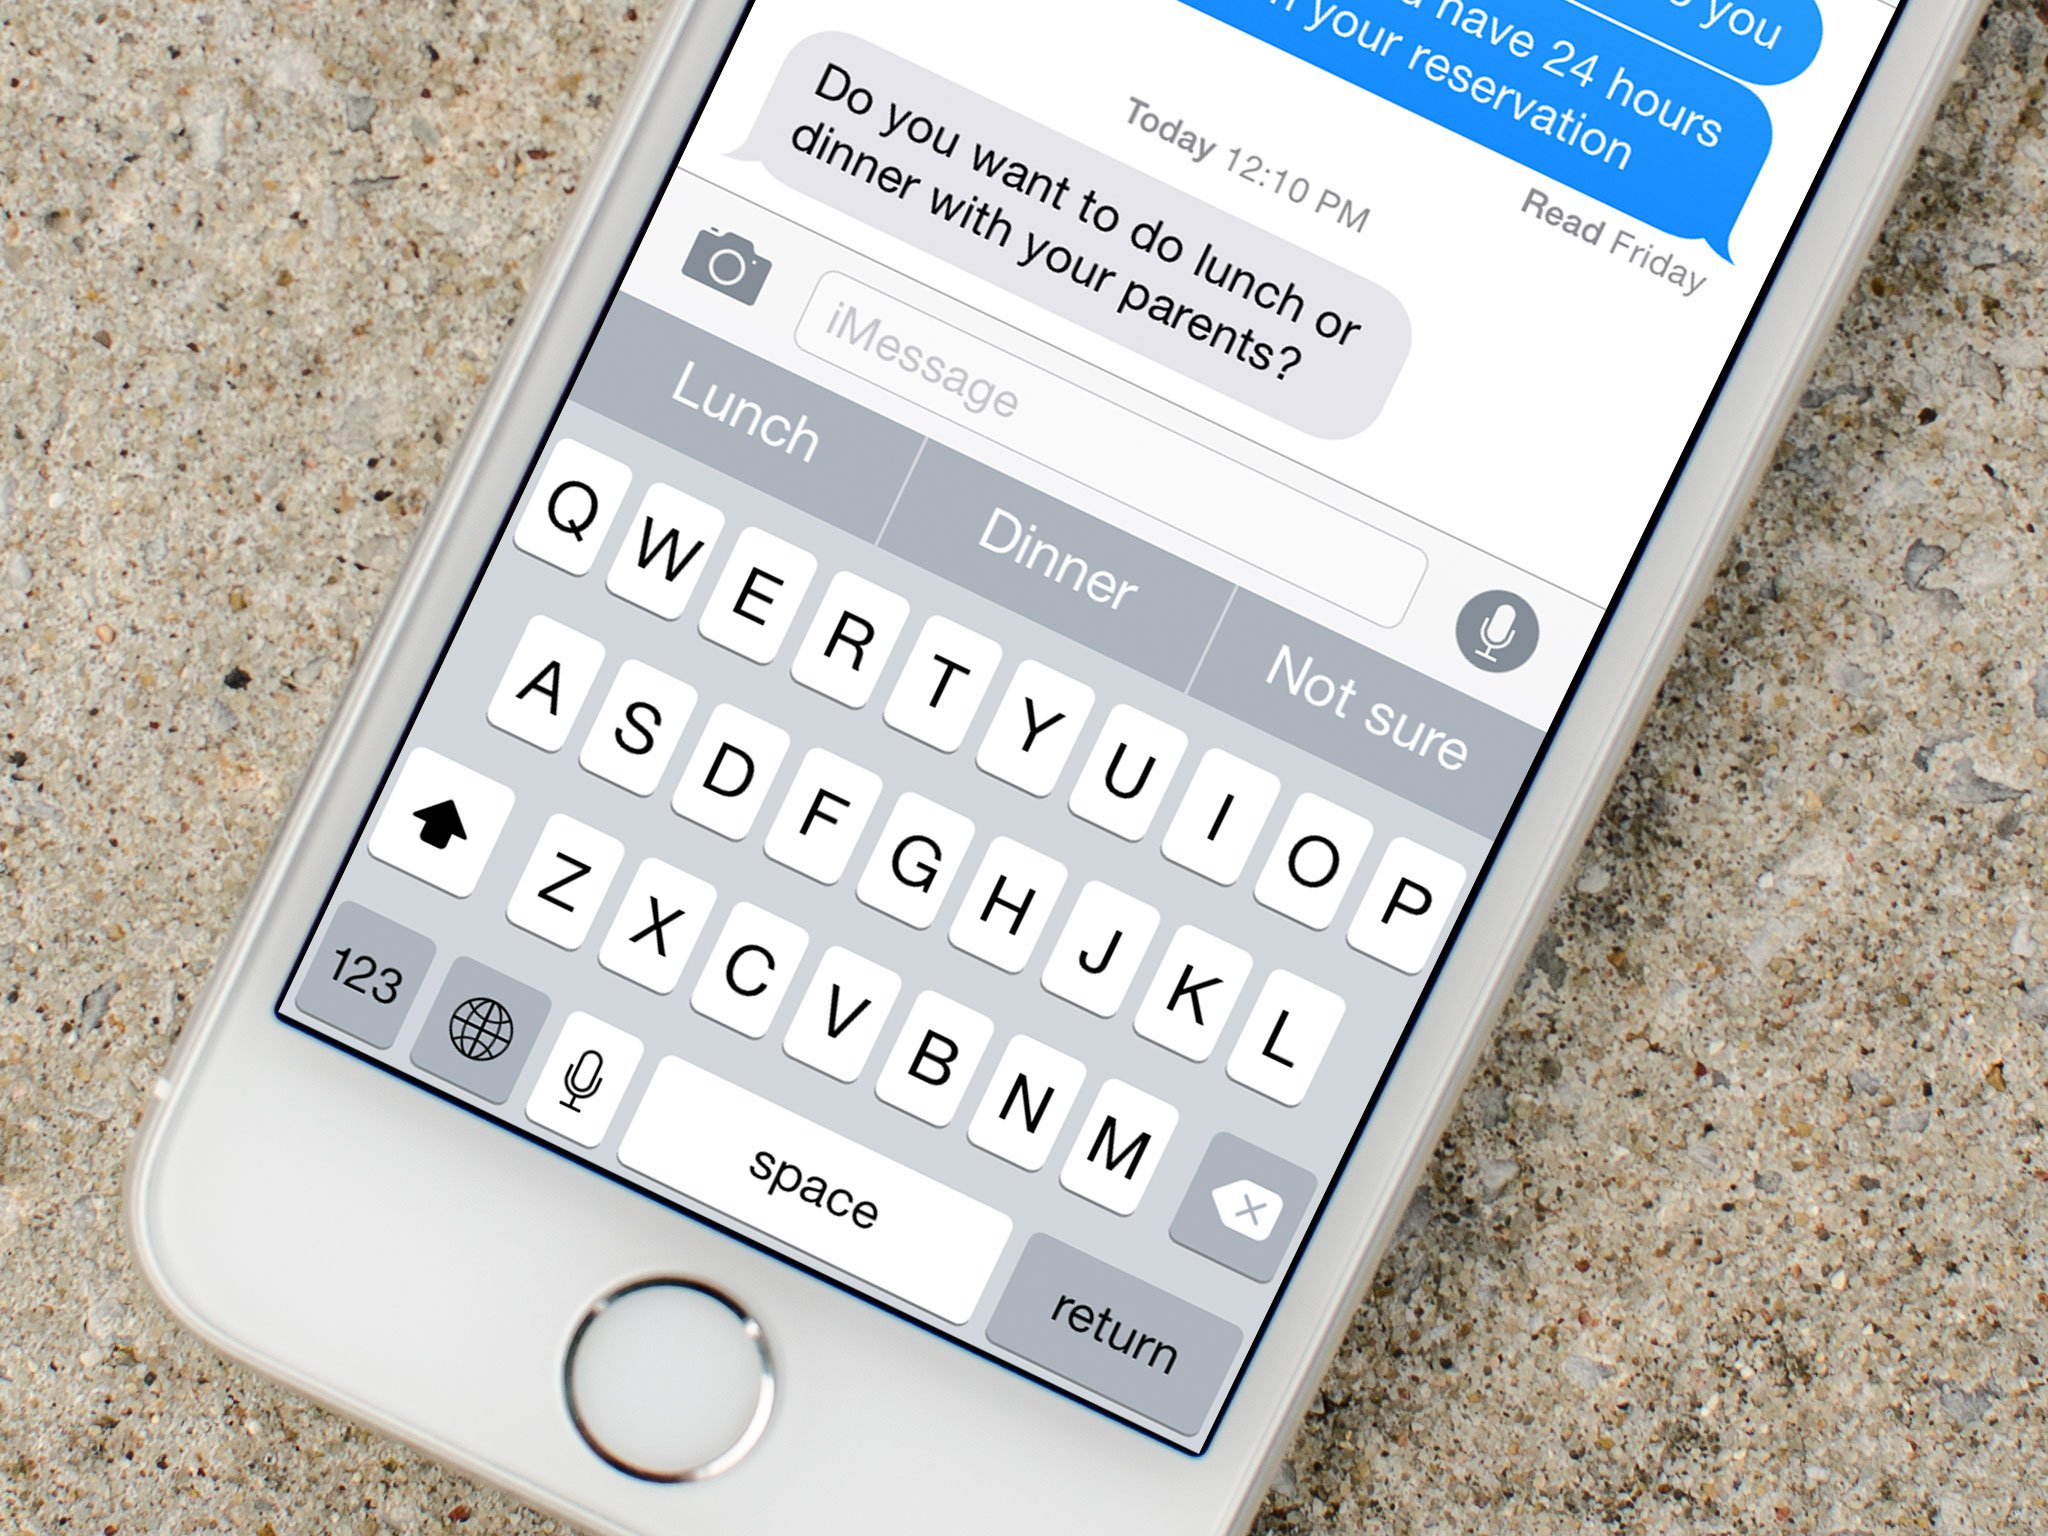 How to edit and format text on iPhone and iPad